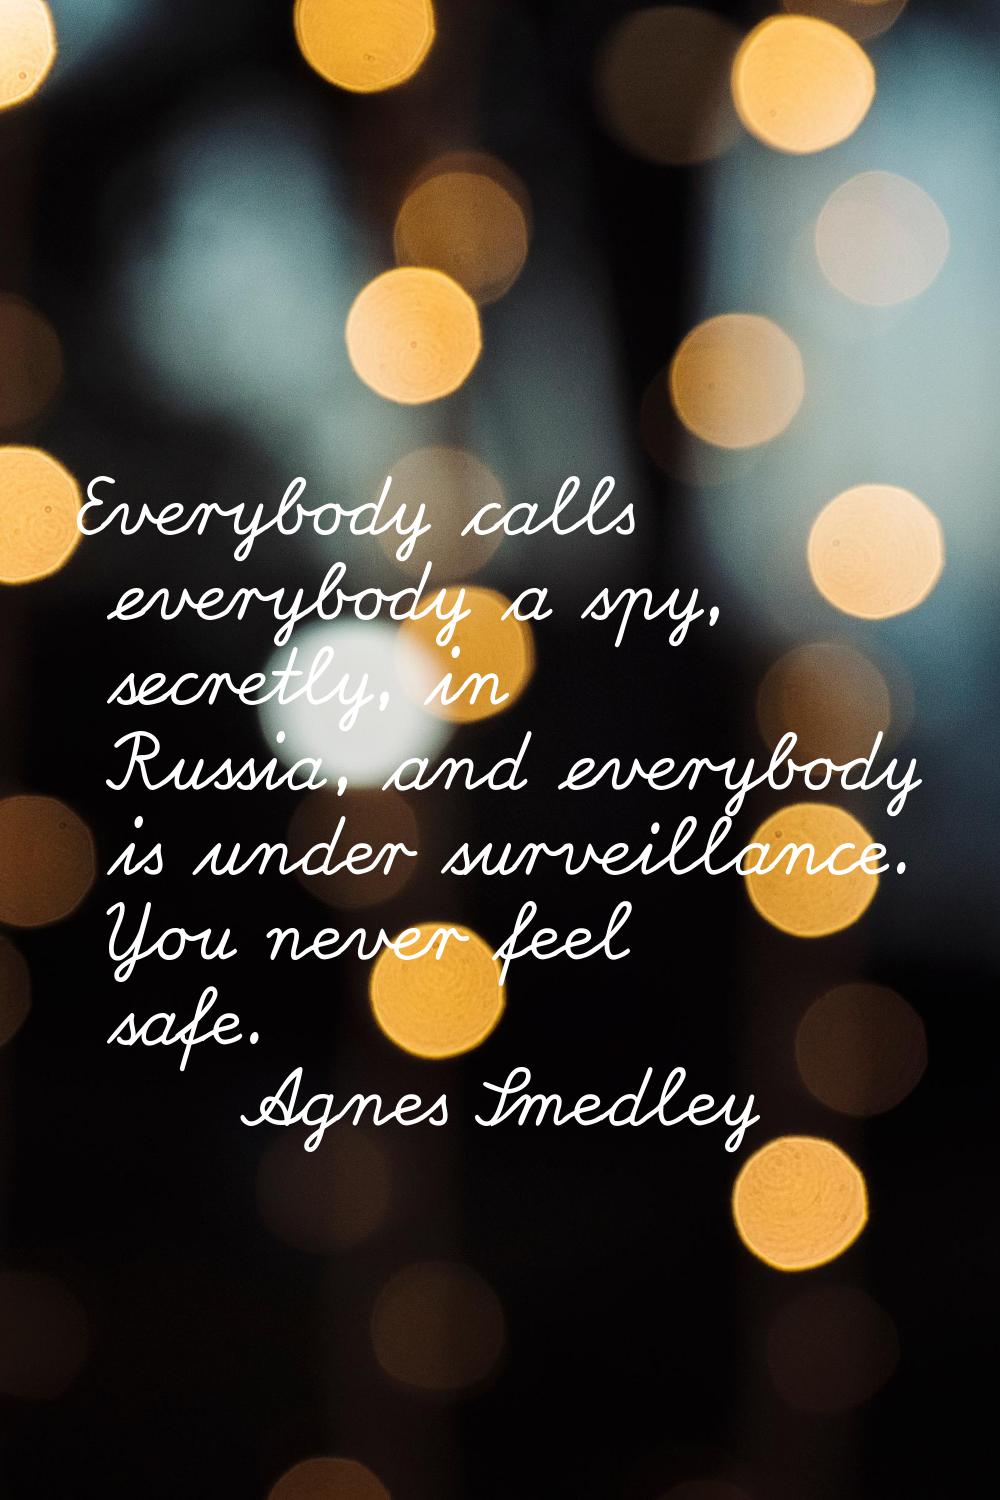 Everybody calls everybody a spy, secretly, in Russia, and everybody is under surveillance. You neve